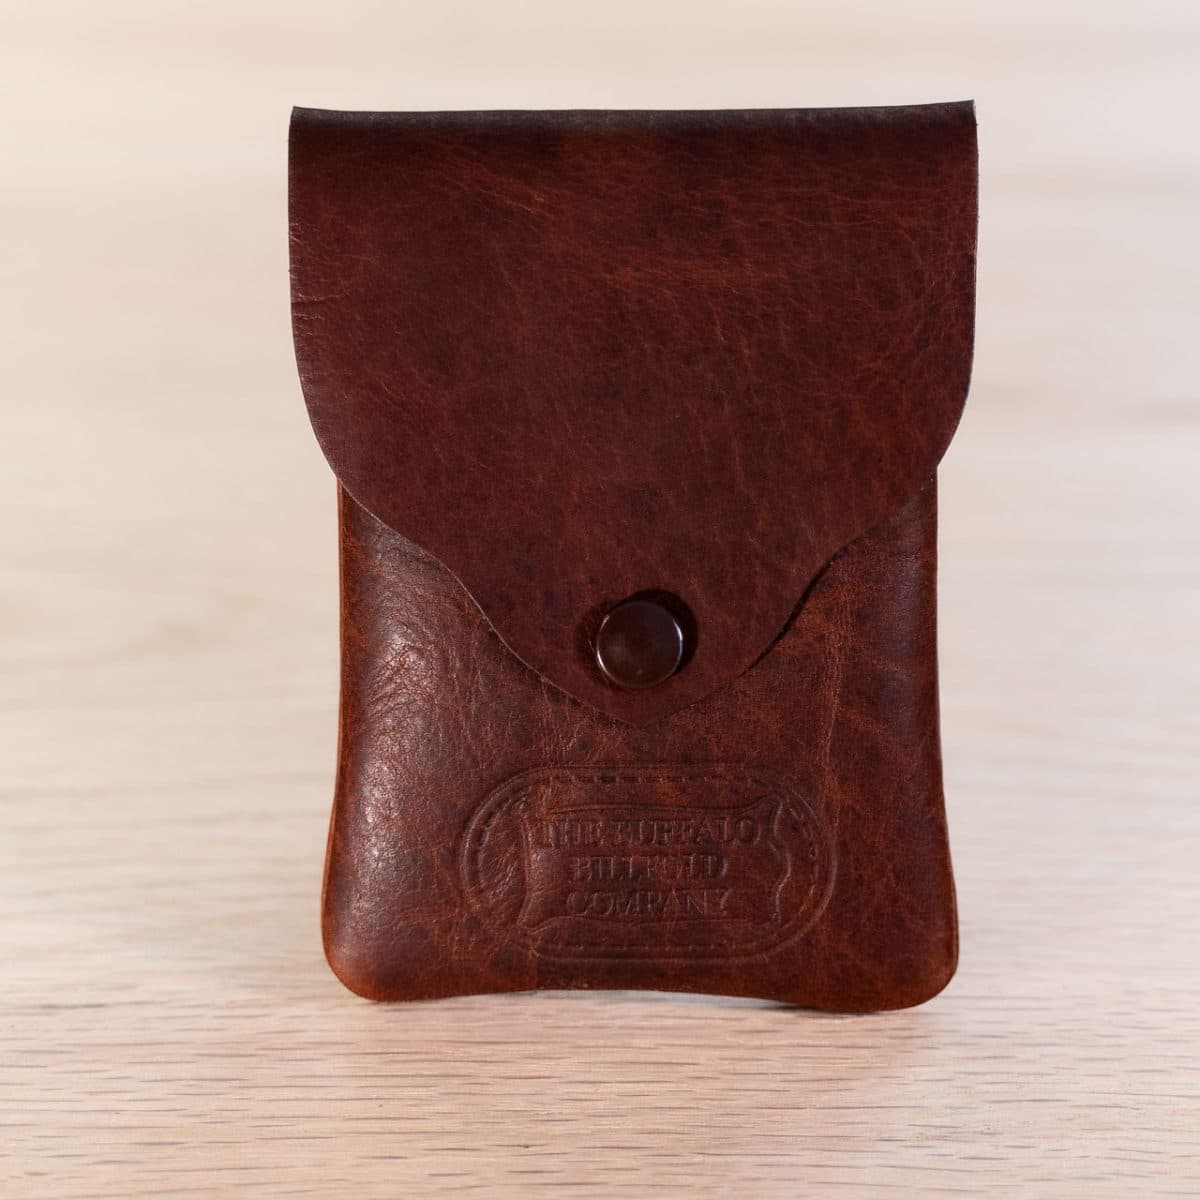 https://buffalobillfoldcompany.com/wp-content/uploads/2022/12/Vertical-Business-Card-Holder-Red-Leather-1200x1200-cropped.jpg